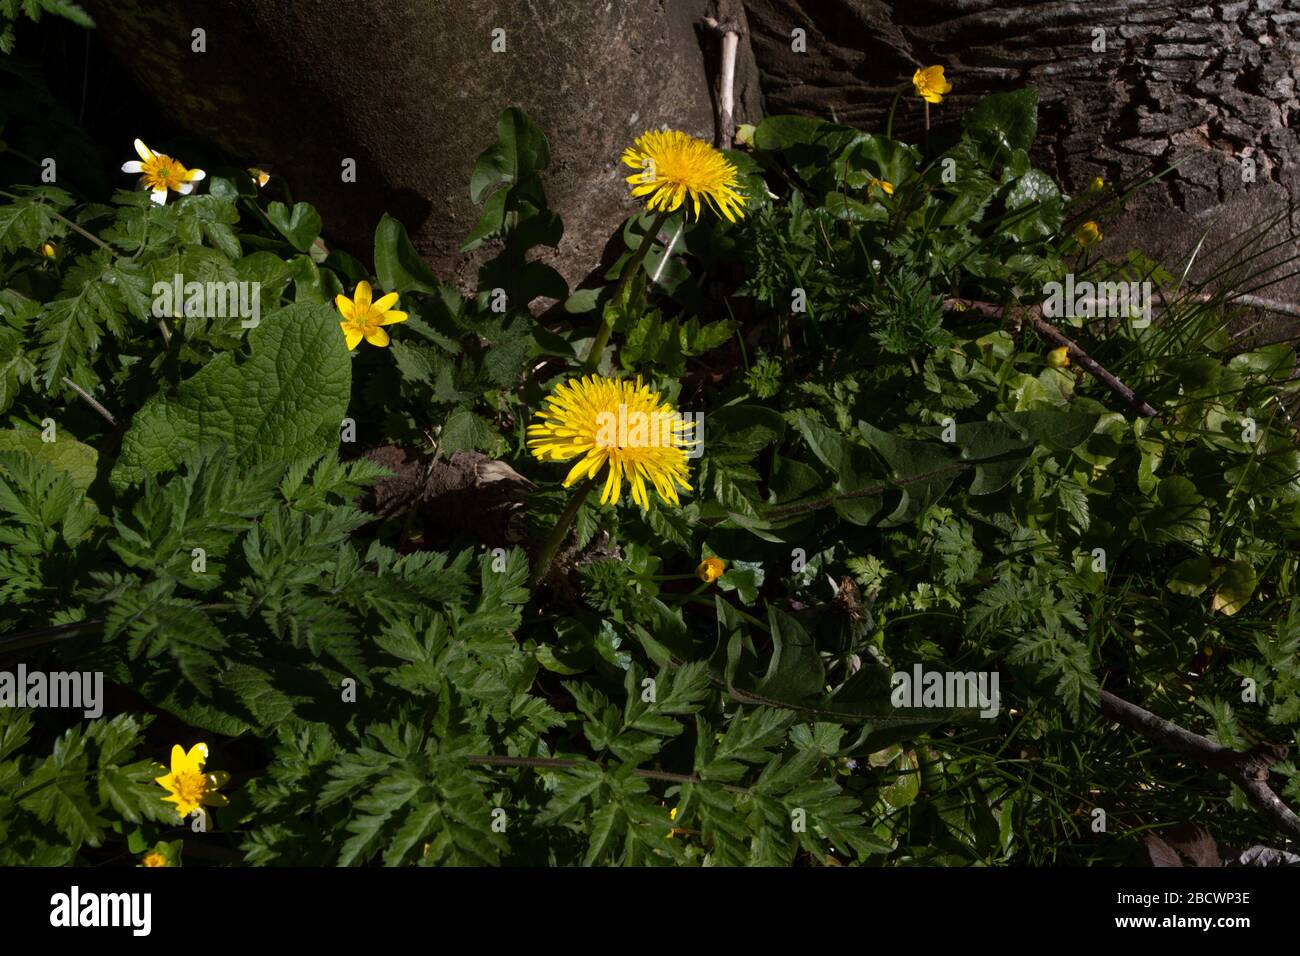 Dandelion, Taraxacum officinale, UK native perrenial, up to 35cm, flowers March to September, flowers open in full sun only.  Mixed spring flowers, Stock Photo